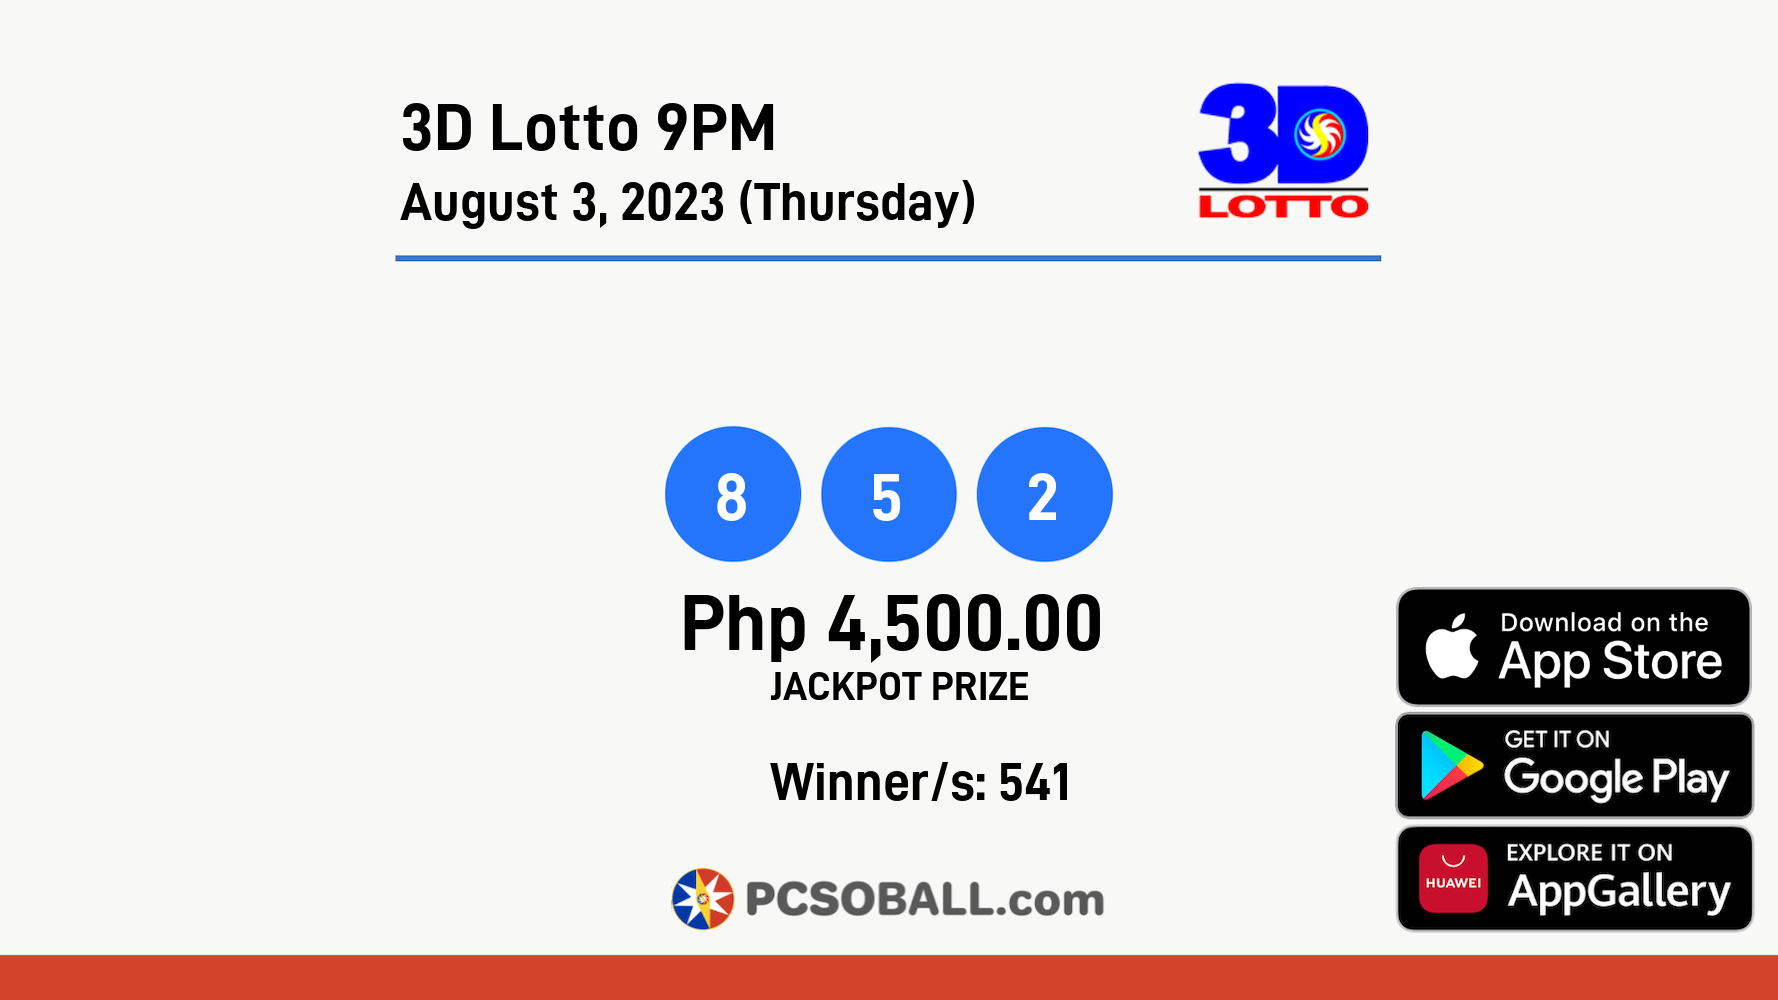 3D Lotto 9PM August 3, 2023 (Thursday) Result